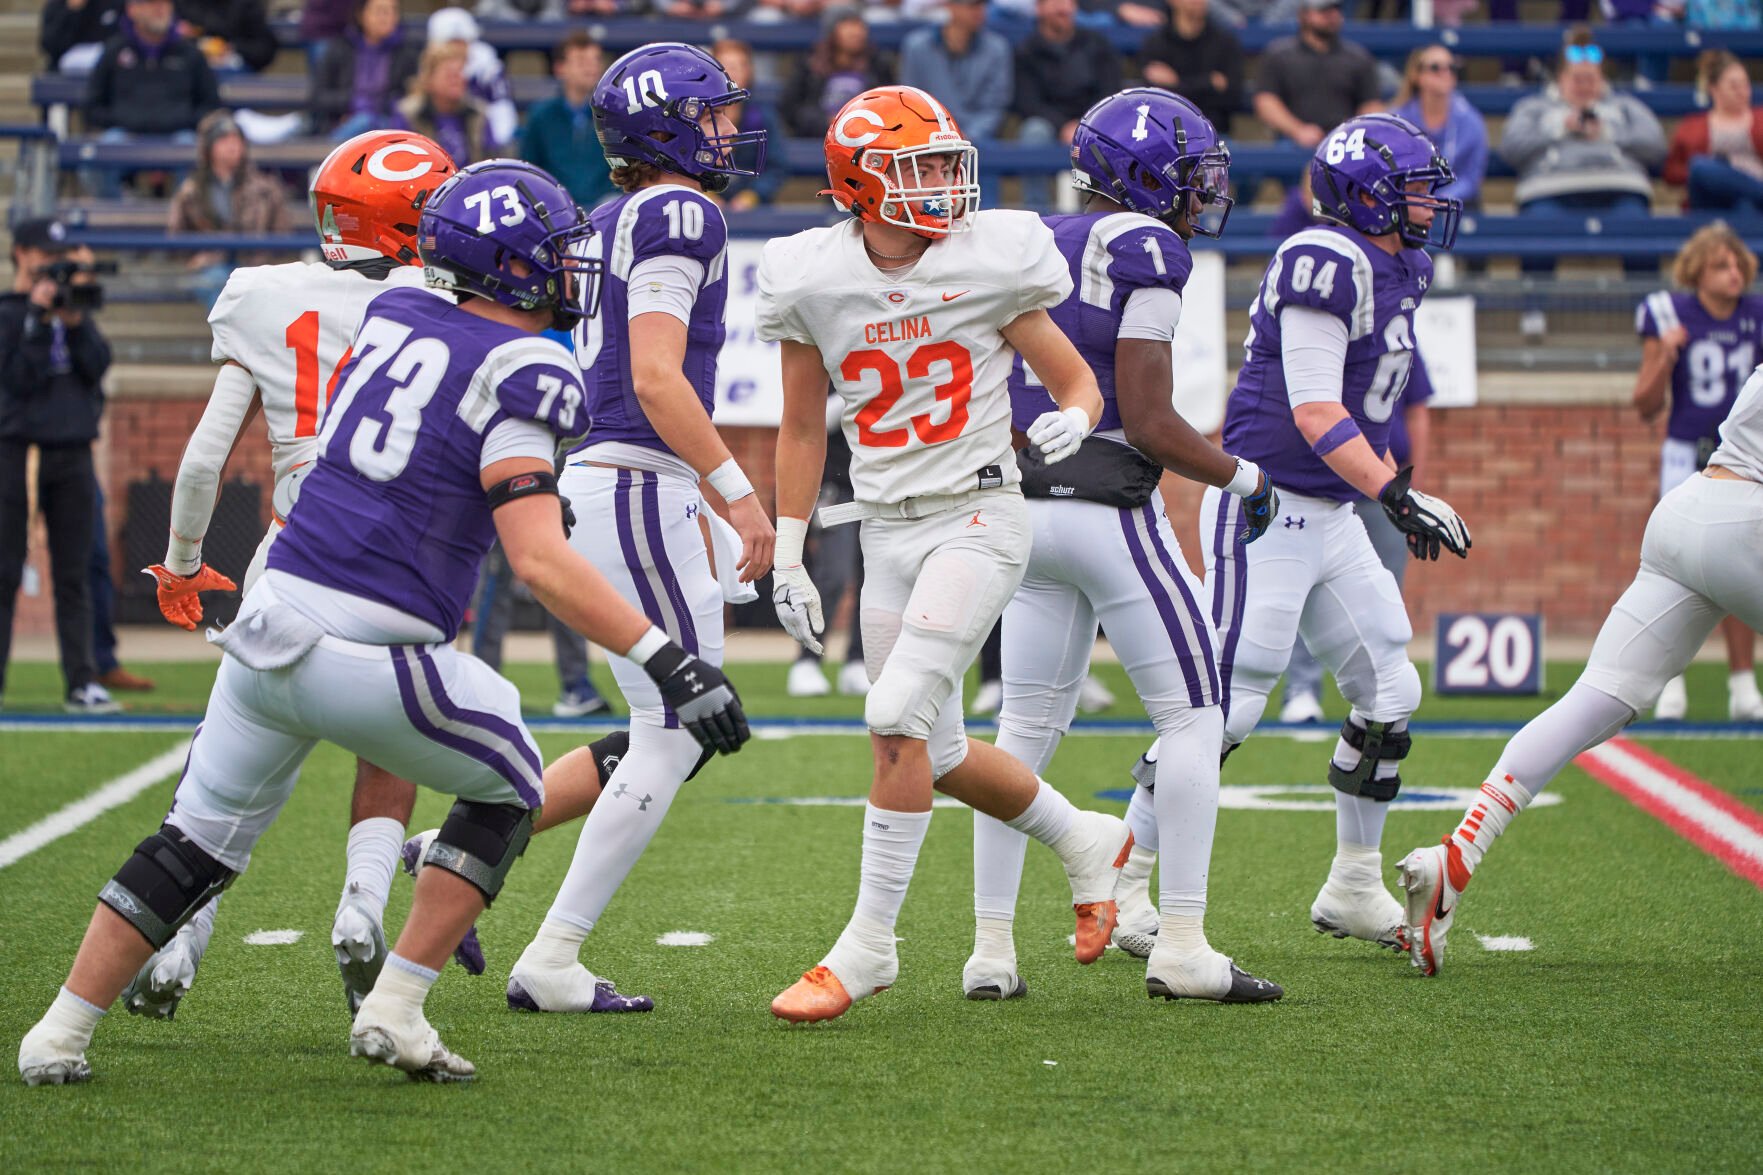 Celina Bobcats Finish Strong with an 11-2 Record: Ben Thomas Reflects on a Successful High School Football Career